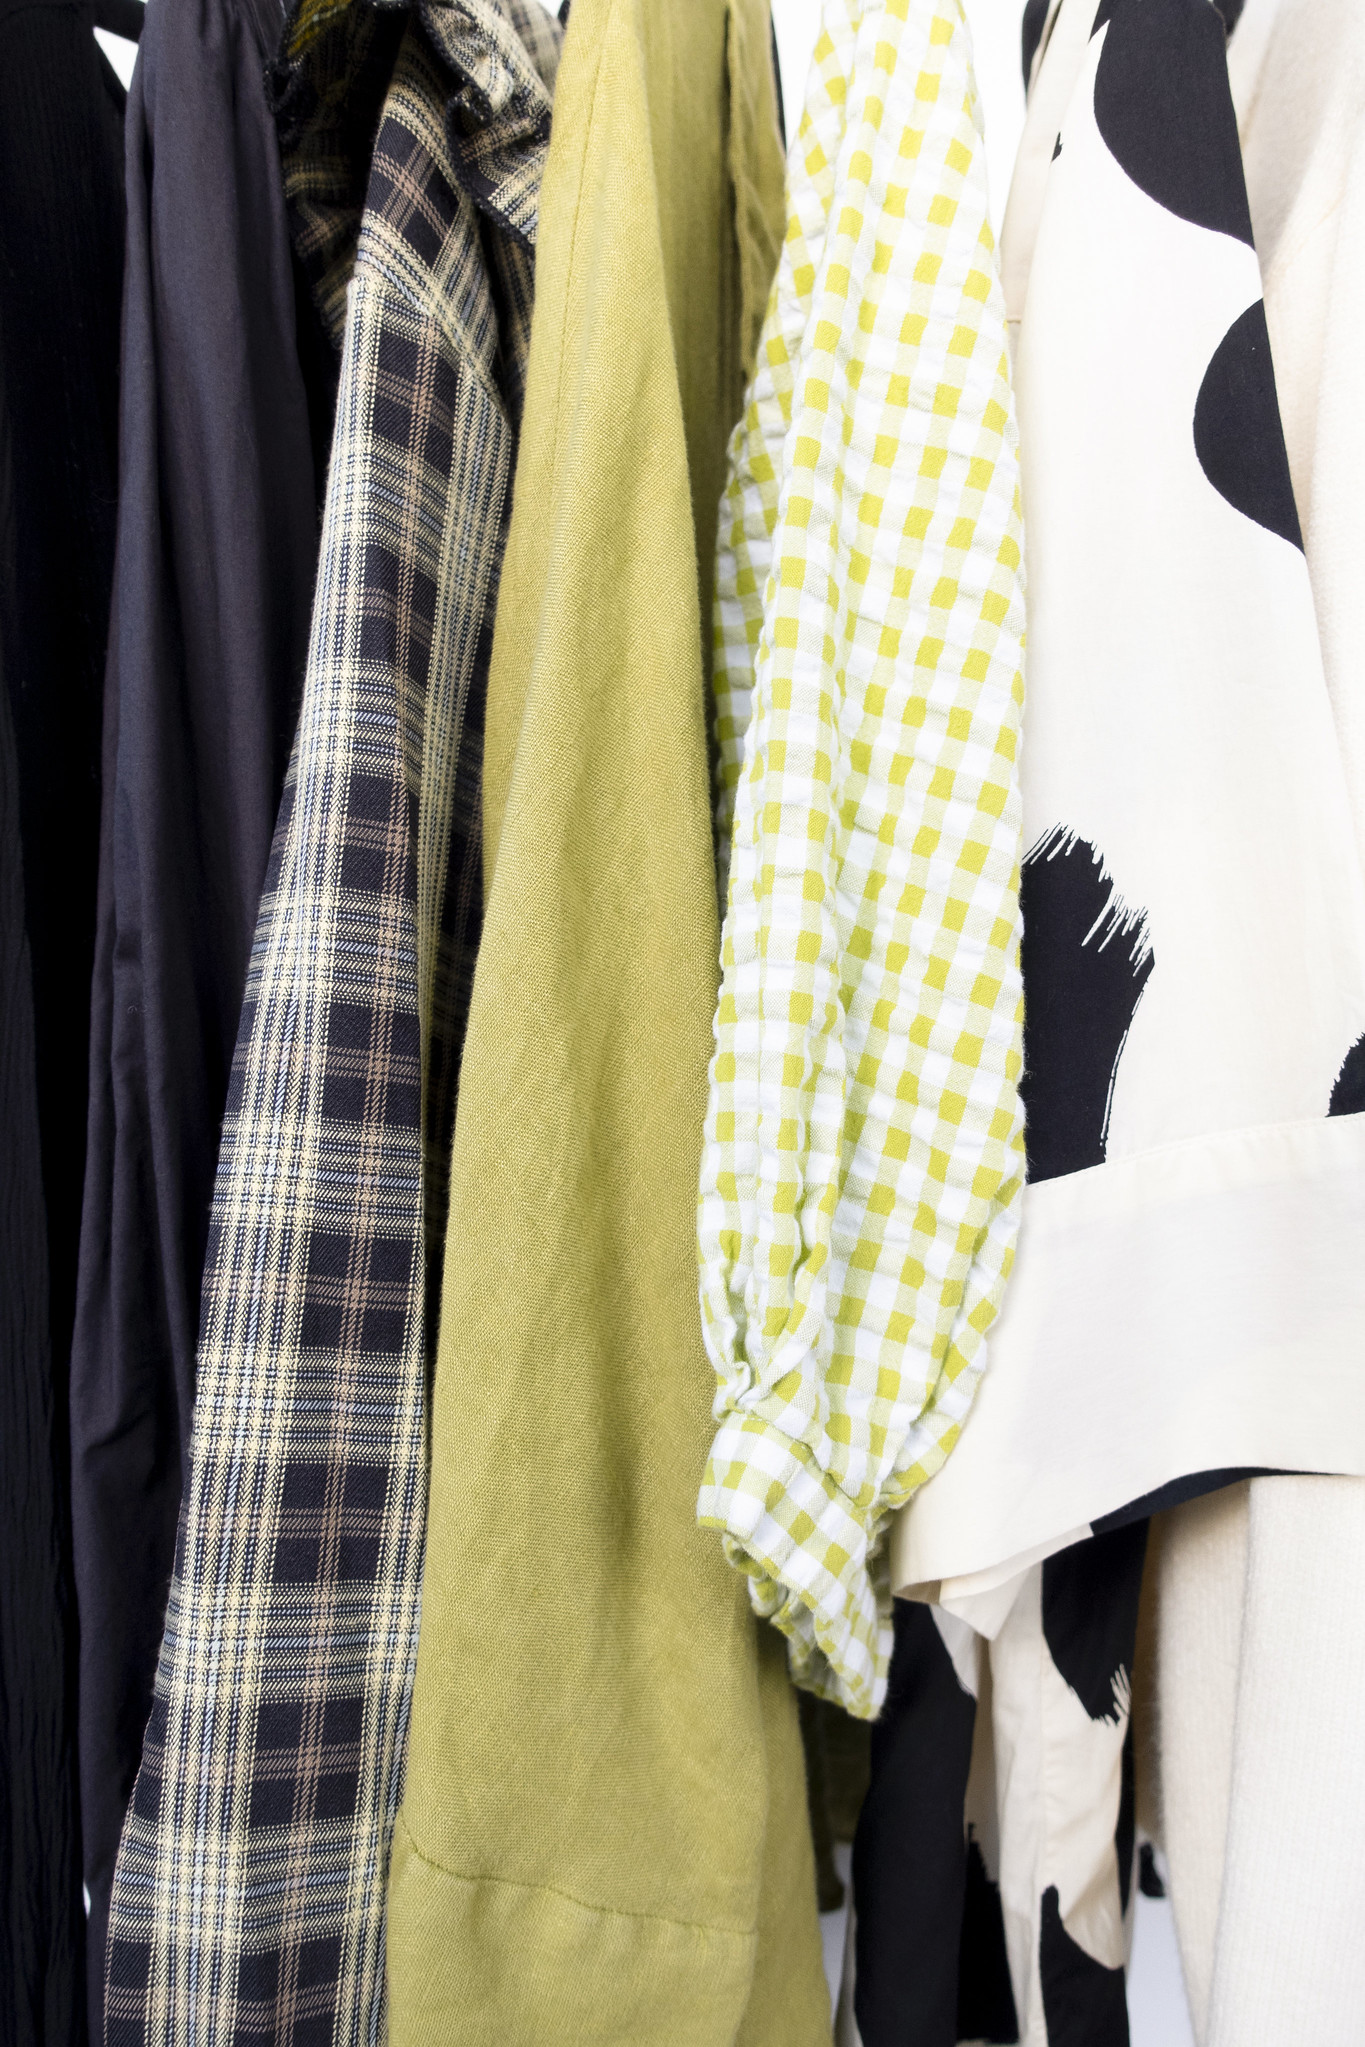 How to Create a Wardrobe Inventory